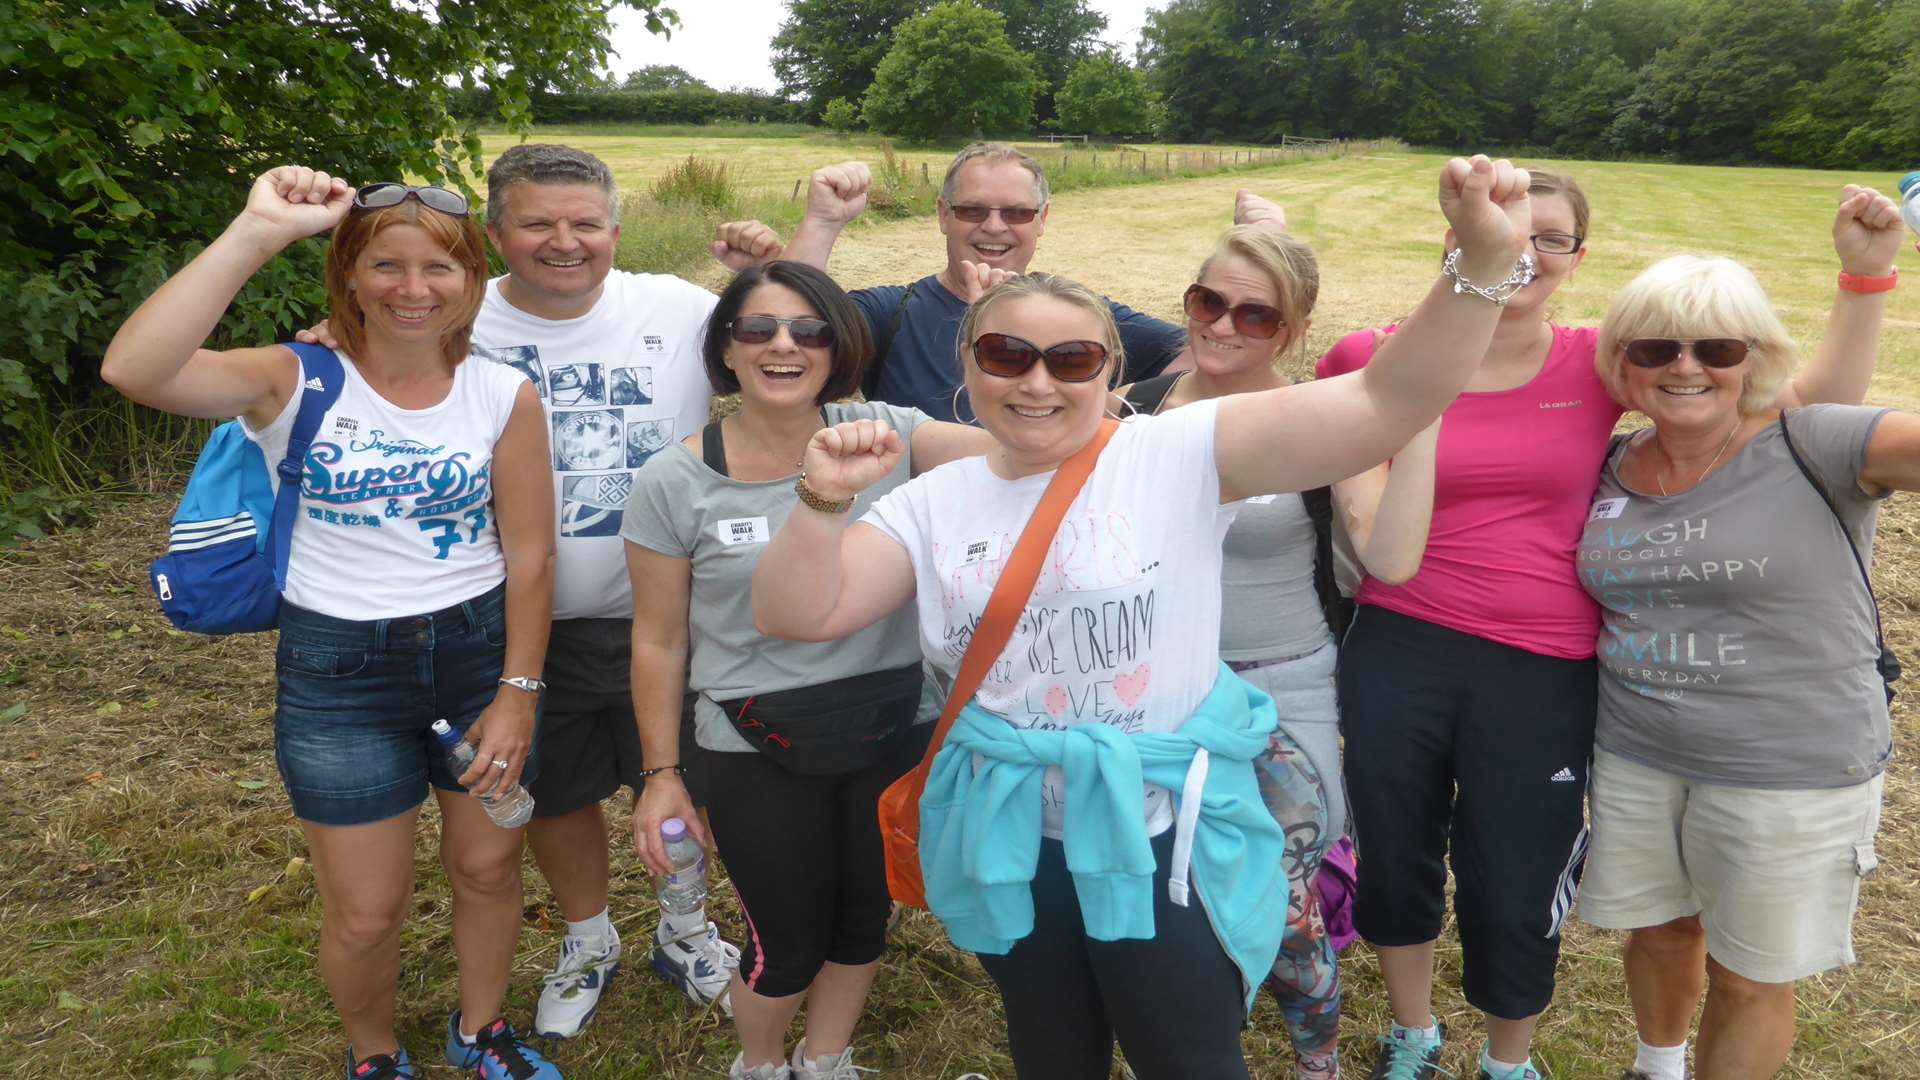 Staff from Gravesend company Blue Fin took part to raise funds for the Heart of Kent Hospice